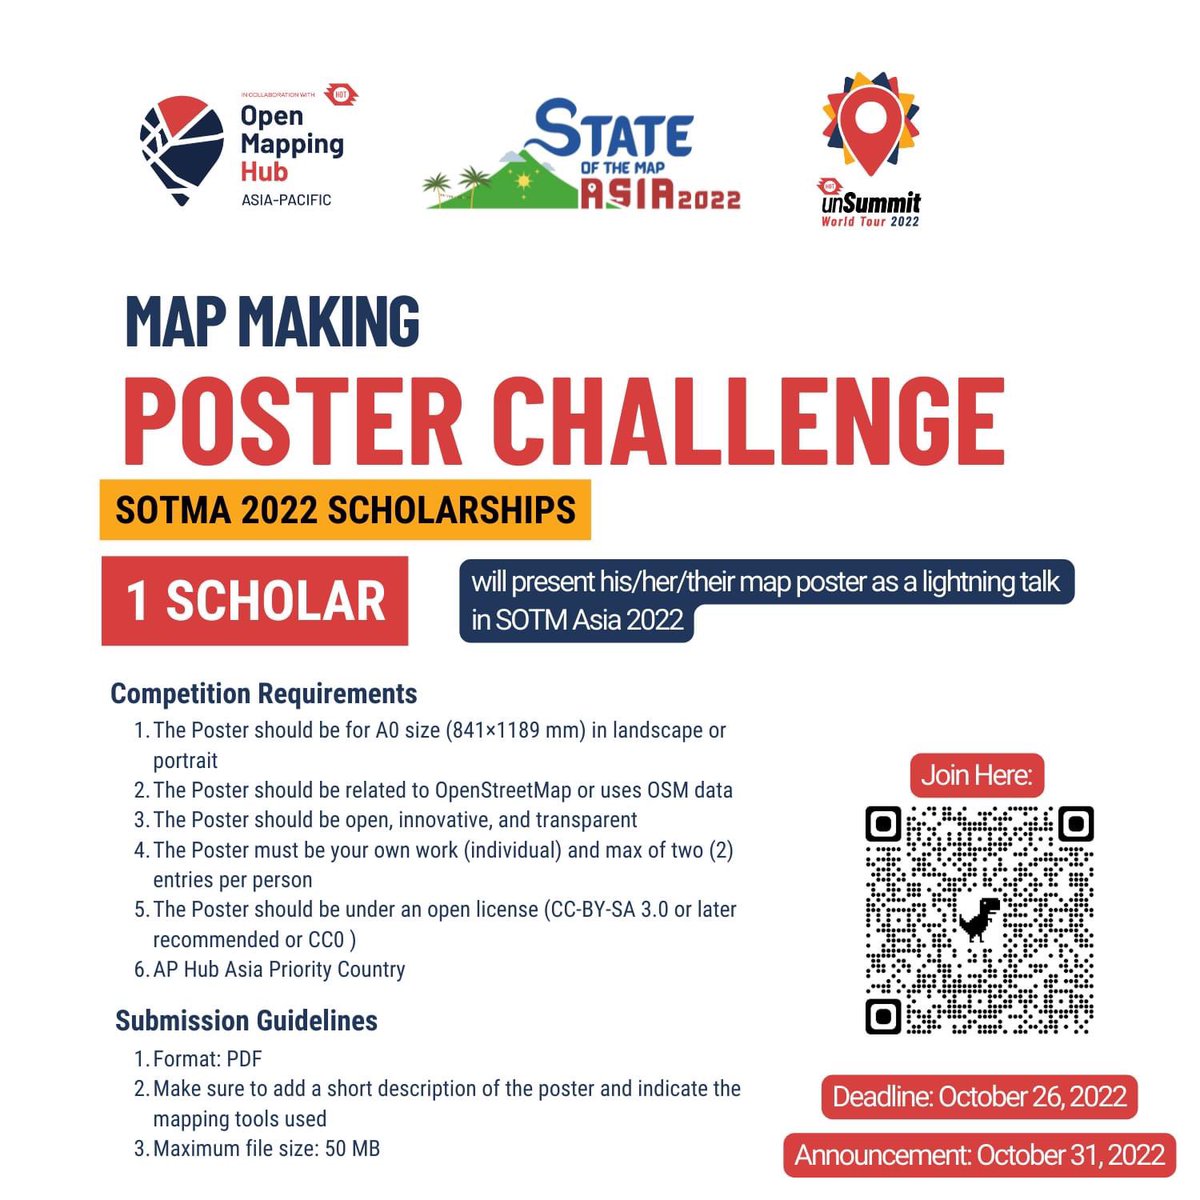 #StateoftheMapAsia2022 is around the corner!OMH-AP supported by @hotosm's #unSummit2022 is offering travel scholarships to 10-12 individuals from the open mapping community! More info: docs.google.com/document/d/1ES…